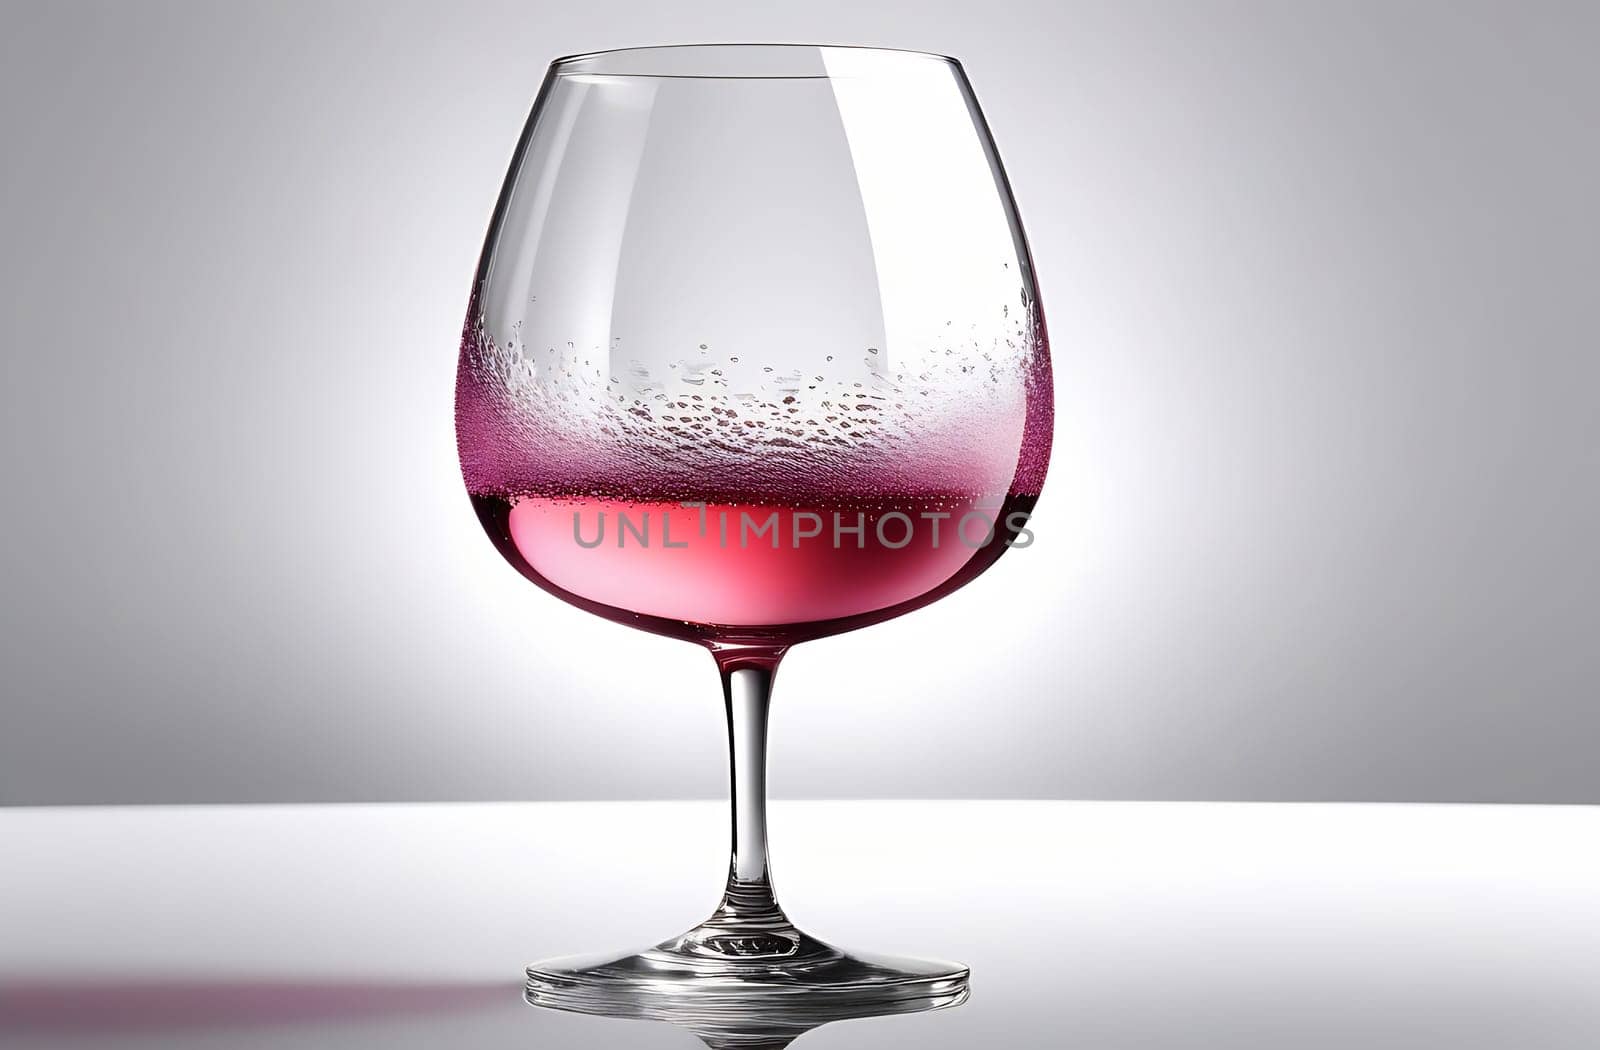 One wine glass half filled with pink sparkling wine with bubbles, close-up shots.